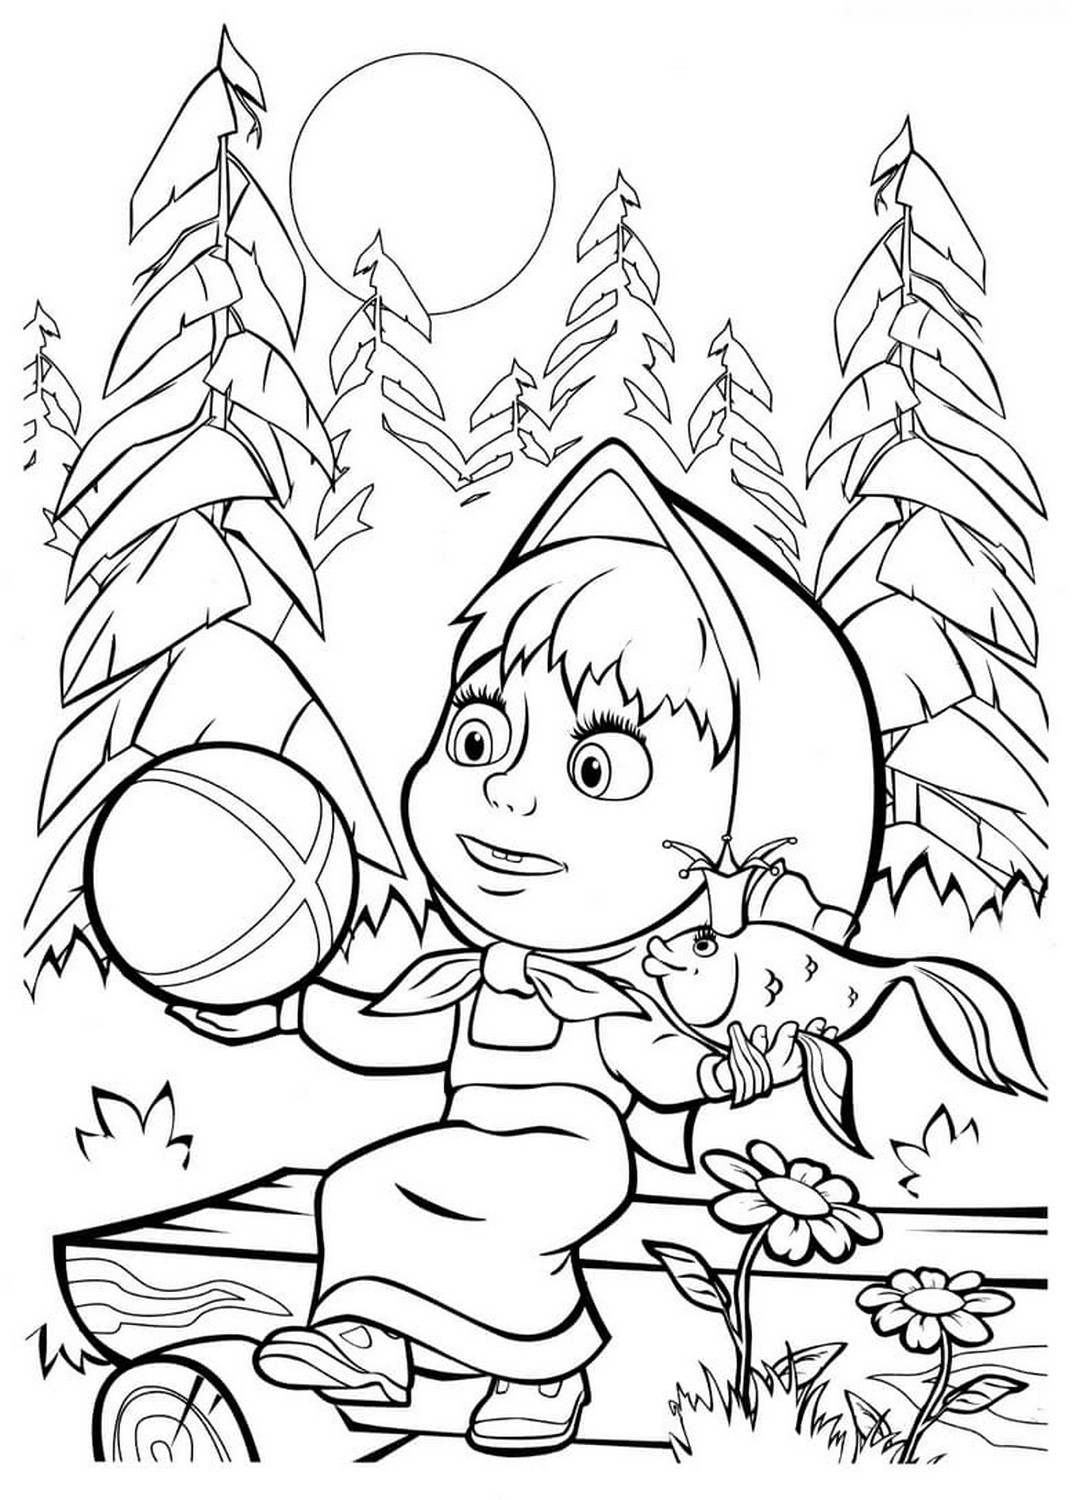 Drawing 27 of Masha and the Bear to print and color